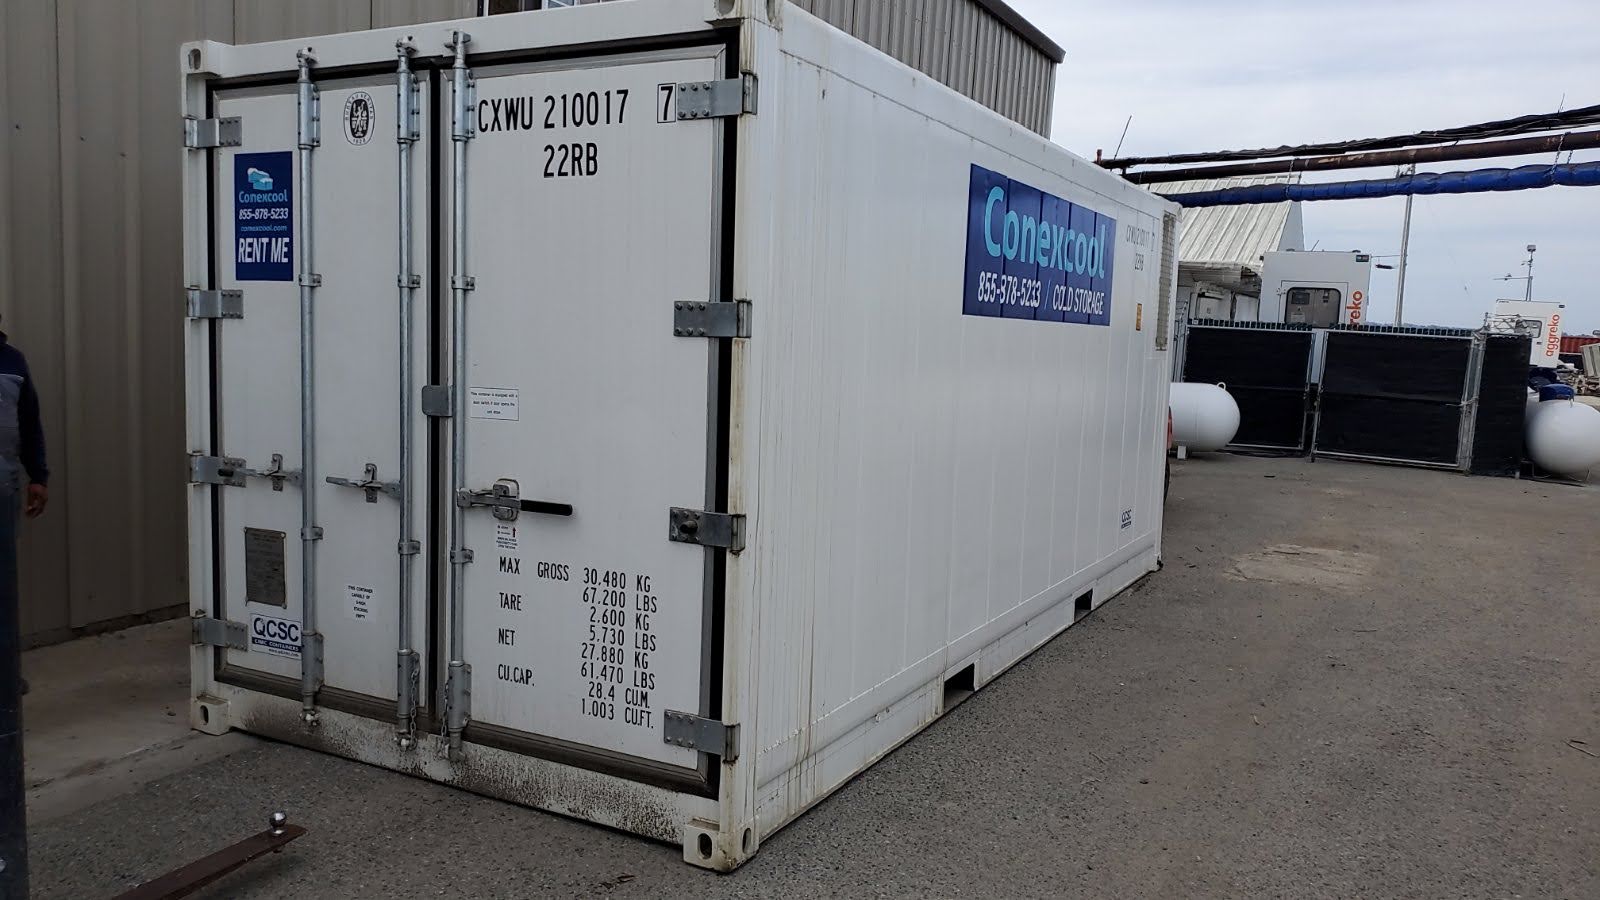 20ft storage containers for rent near me